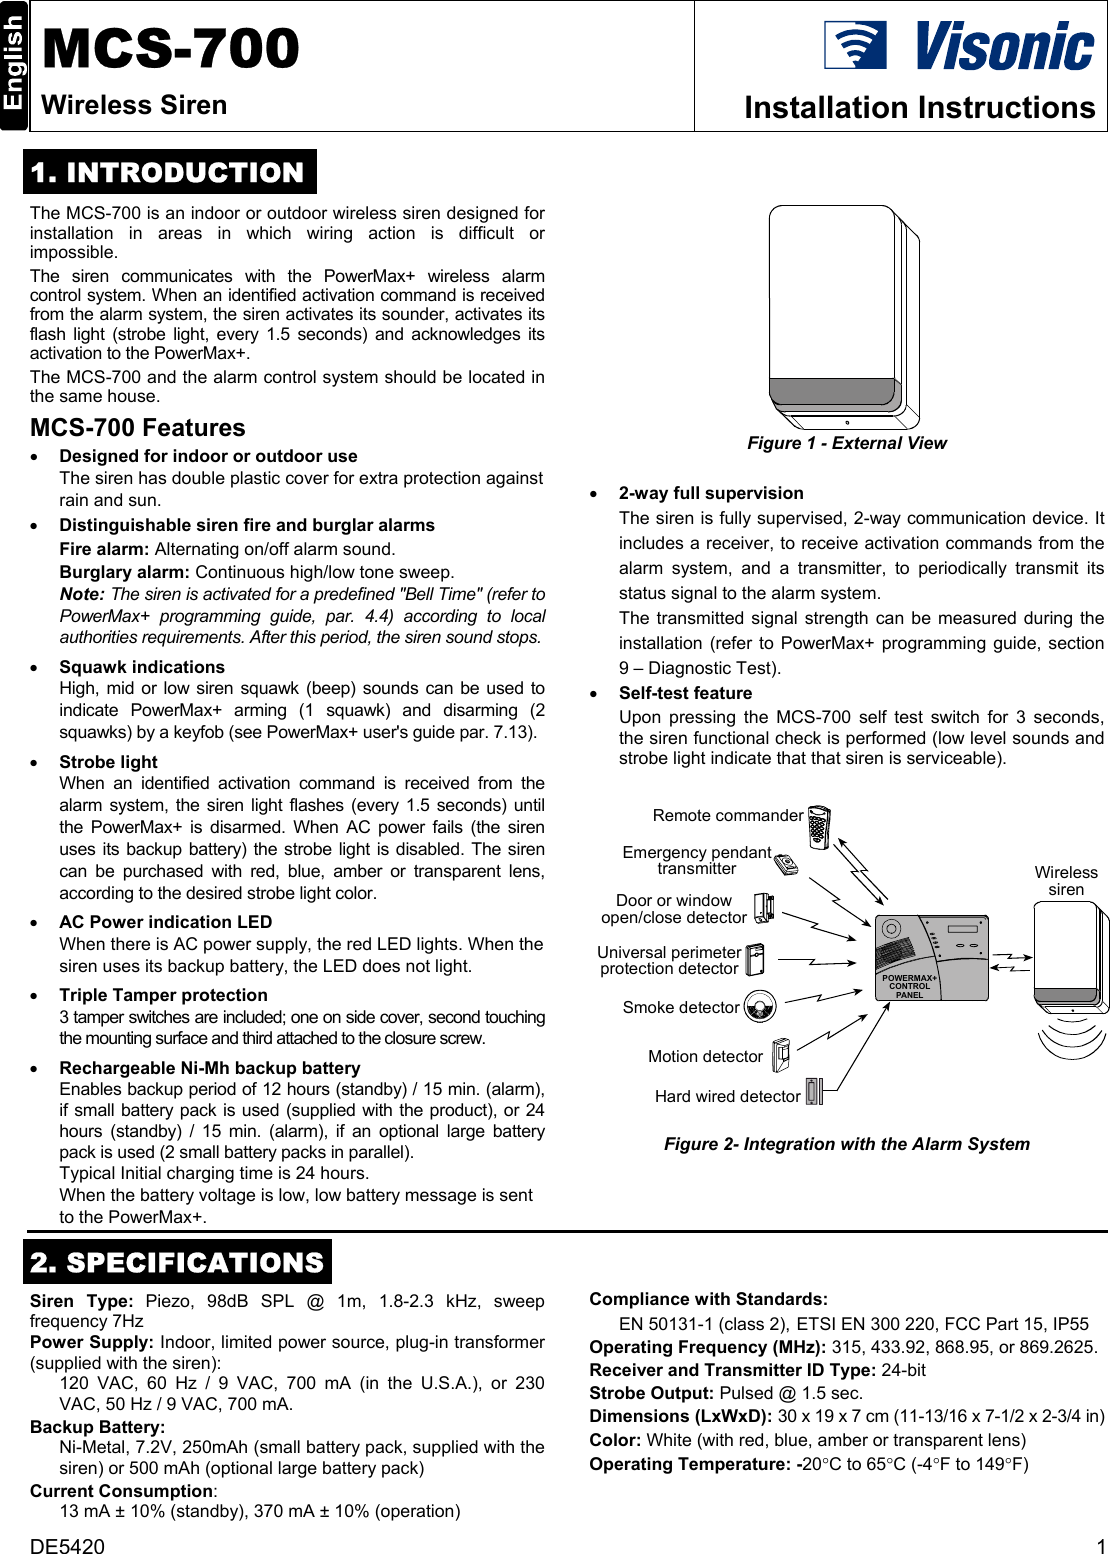 DE5420  1  MCS-700 Wireless Siren  Installation Instructions  1. INTRODUCTION The MCS-700 is an indoor or outdoor wireless siren designed for installation in areas in which wiring action is difficult or impossible. The siren communicates with the PowerMax+ wireless alarm control system. When an identified activation command is received from the alarm system, the siren activates its sounder, activates its flash light (strobe light, every 1.5 seconds) and acknowledges its activation to the PowerMax+.  The MCS-700 and the alarm control system should be located in the same house. MCS-700 Features • Designed for indoor or outdoor use The siren has double plastic cover for extra protection against rain and sun. • Distinguishable siren fire and burglar alarms Fire alarm: Alternating on/off alarm sound. Burglary alarm: Continuous high/low tone sweep. Note: The siren is activated for a predefined &quot;Bell Time&quot; (refer to PowerMax+ programming guide, par. 4.4) according to local authorities requirements. After this period, the siren sound stops.  • Squawk indications High, mid or low siren squawk (beep) sounds can be used to indicate PowerMax+ arming (1 squawk) and disarming (2 squawks) by a keyfob (see PowerMax+ user&apos;s guide par. 7.13). • Strobe light When an identified activation command is received from the alarm system, the siren light flashes (every 1.5 seconds) until the PowerMax+ is disarmed. When AC power fails (the siren uses its backup battery) the strobe light is disabled. The siren can be purchased with red, blue, amber or transparent lens, according to the desired strobe light color.  • AC Power indication LED When there is AC power supply, the red LED lights. When the siren uses its backup battery, the LED does not light. • Triple Tamper protection 3 tamper switches are included; one on side cover, second touching the mounting surface and third attached to the closure screw. • Rechargeable Ni-Mh backup battery Enables backup period of 12 hours (standby) / 15 min. (alarm), if small battery pack is used (supplied with the product), or 24 hours (standby) / 15 min. (alarm), if an optional large battery pack is used (2 small battery packs in parallel). Typical Initial charging time is 24 hours. When the battery voltage is low, low battery message is sent to the PowerMax+.   Figure 1 - External View  • 2-way full supervision The siren is fully supervised, 2-way communication device. It includes a receiver, to receive activation commands from the alarm system, and a transmitter, to periodically transmit its status signal to the alarm system. The transmitted signal strength can be measured during the installation (refer to PowerMax+ programming guide, section 9 – Diagnostic Test). • Self-test feature Upon pressing the MCS-700 self test switch for 3 seconds, the siren functional check is performed (low level sounds and strobe light indicate that that siren is serviceable). WirelesssirenHard wired detectorEmergency pendanttransmitterSmoke detectorUniversal perimeterprotection detectorDoor or windowopen/close detectorMotion detectorRemote commanderPOWERMAX+CONTROLPANEL Figure 2- Integration with the Alarm System    2. SPECIFICATIONS Siren Type: Piezo, 98dB SPL @ 1m, 1.8-2.3 kHz, sweep frequency 7Hz Power Supply: Indoor, limited power source, plug-in transformer (supplied with the siren):  120 VAC, 60 Hz / 9 VAC, 700 mA (in the U.S.A.), or 230 VAC, 50 Hz / 9 VAC, 700 mA. Backup Battery: Ni-Metal, 7.2V, 250mAh (small battery pack, supplied with the siren) or 500 mAh (optional large battery pack)  Current Consumption: 13 mA ± 10% (standby), 370 mA ± 10% (operation) Compliance with Standards: EN 50131-1 (class 2),  ETSI EN 300 220, FCC Part 15, IP55 Operating Frequency (MHz): 315, 433.92, 868.95, or 869.2625. Receiver and Transmitter ID Type: 24-bit Strobe Output: Pulsed @ 1.5 sec. Dimensions (LxWxD): 30 x 19 x 7 cm (11-13/16 x 7-1/2 x 2-3/4 in)  Color: White (with red, blue, amber or transparent lens) Operating Temperature: -20°C to 65°C (-4°F to 149°F)  